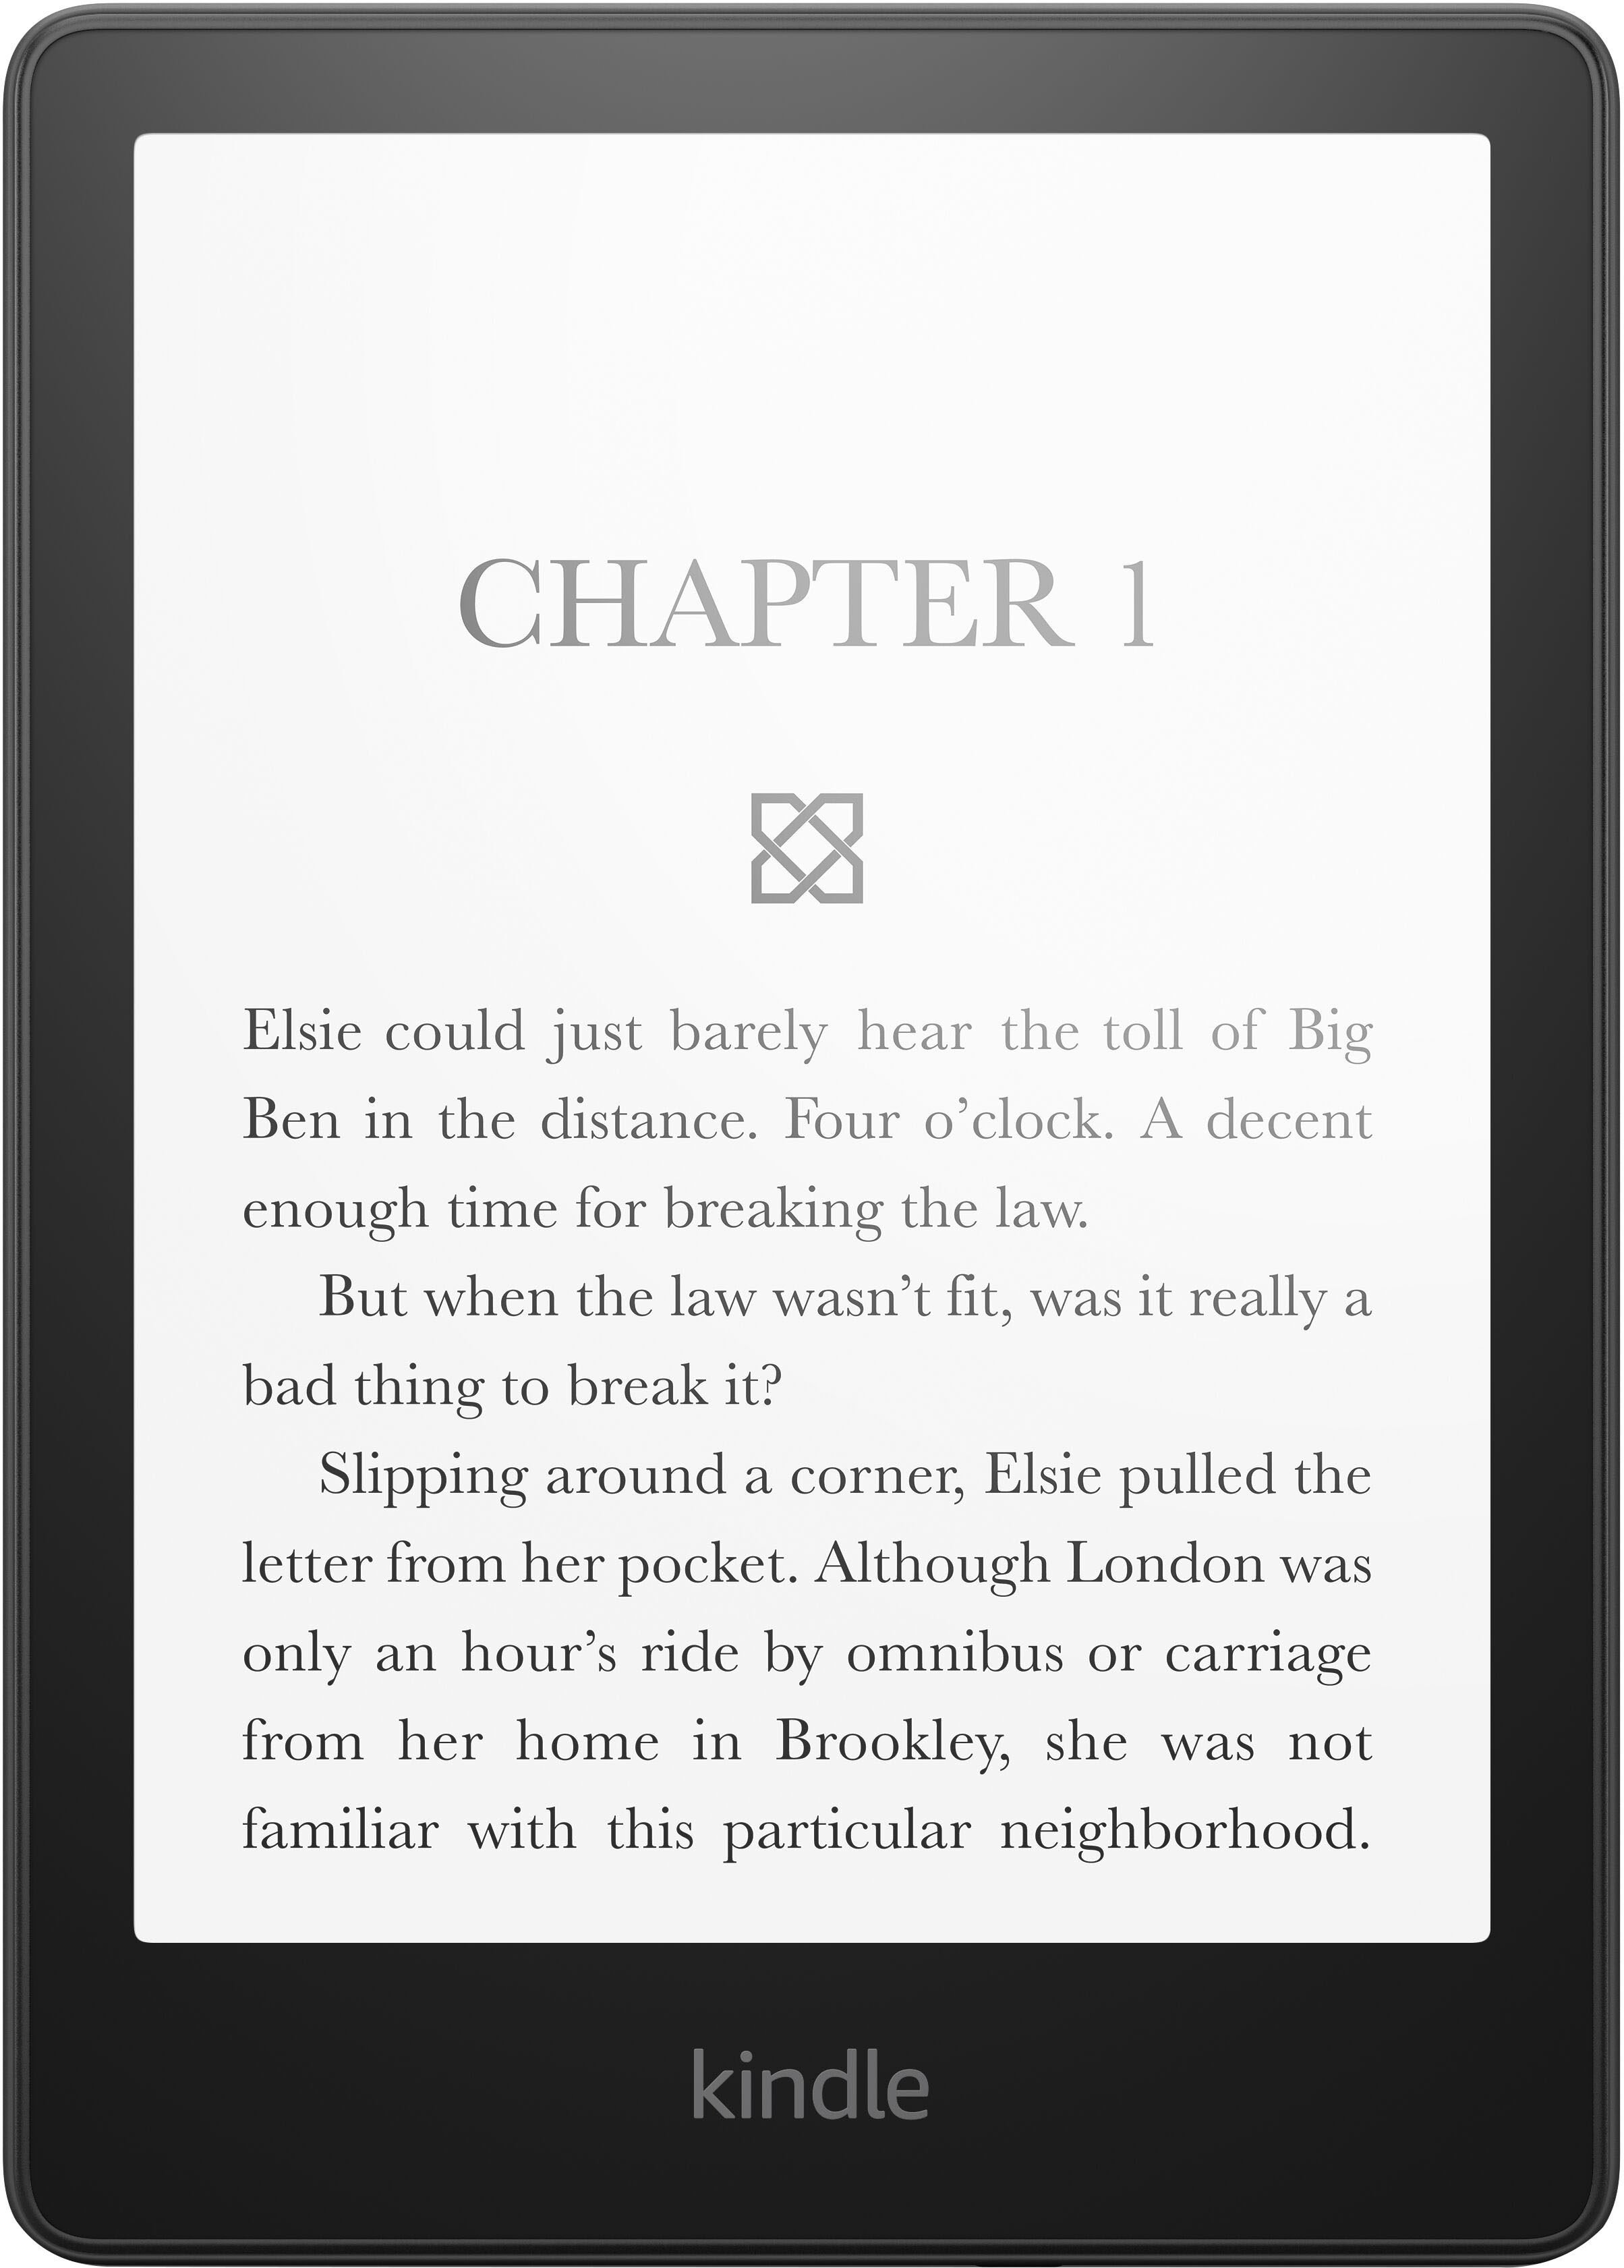 Amazon Kindle Paperwhite 8 GB Now with a 6.8